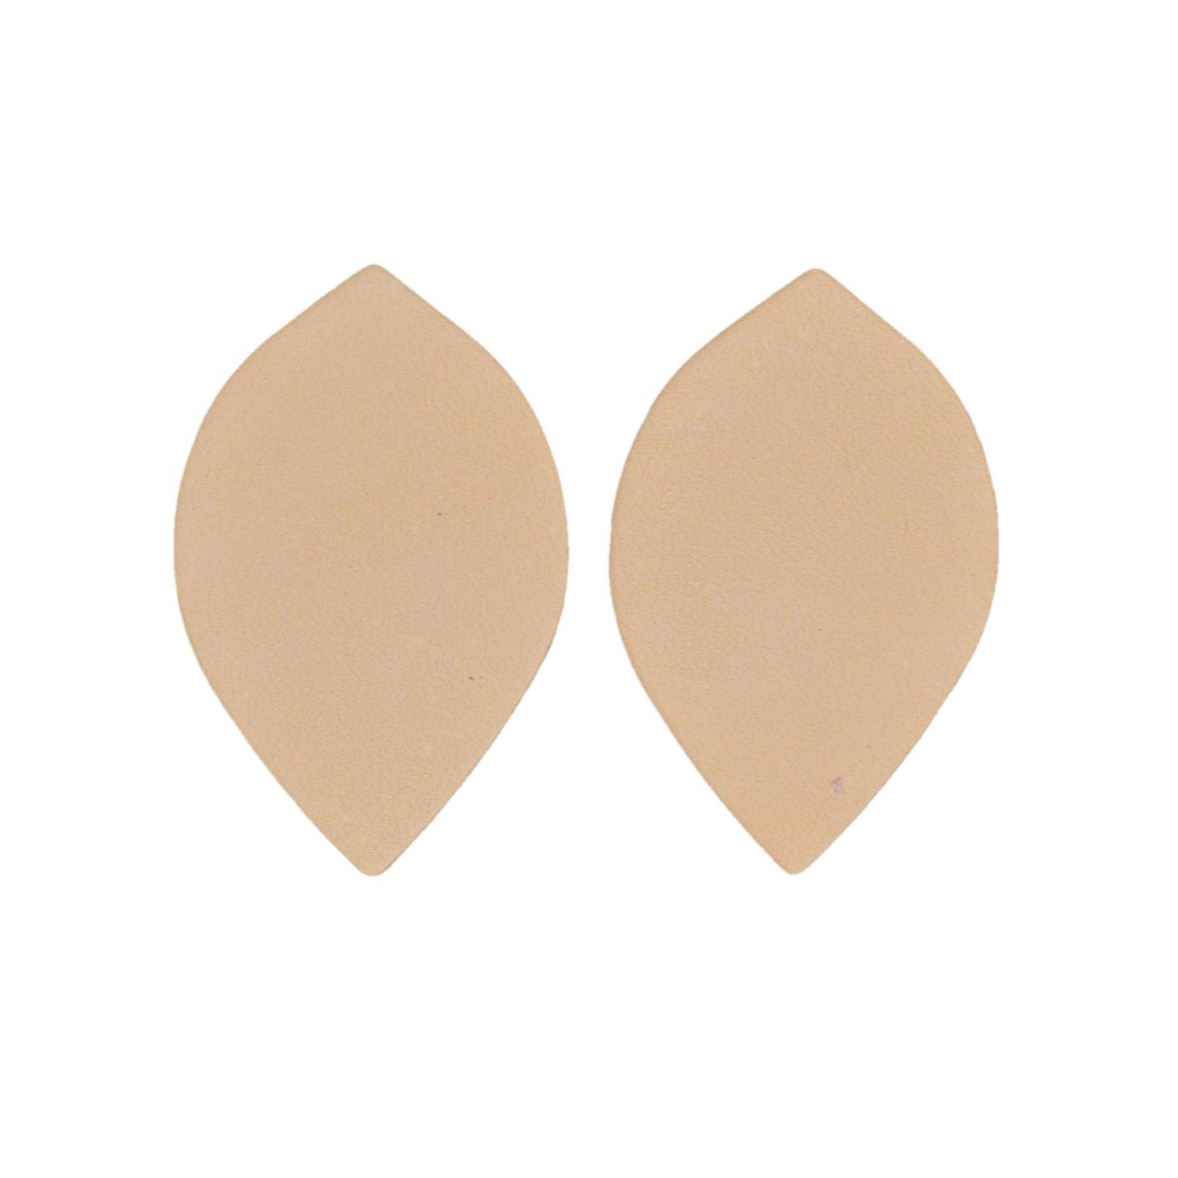 Artisan's Choice Veg Tan Die Cut Leaf Earrings, Small Leaf / 3-4 oz / Small Pack - 4 Pairs / 8 Pieces | The Leather Guy